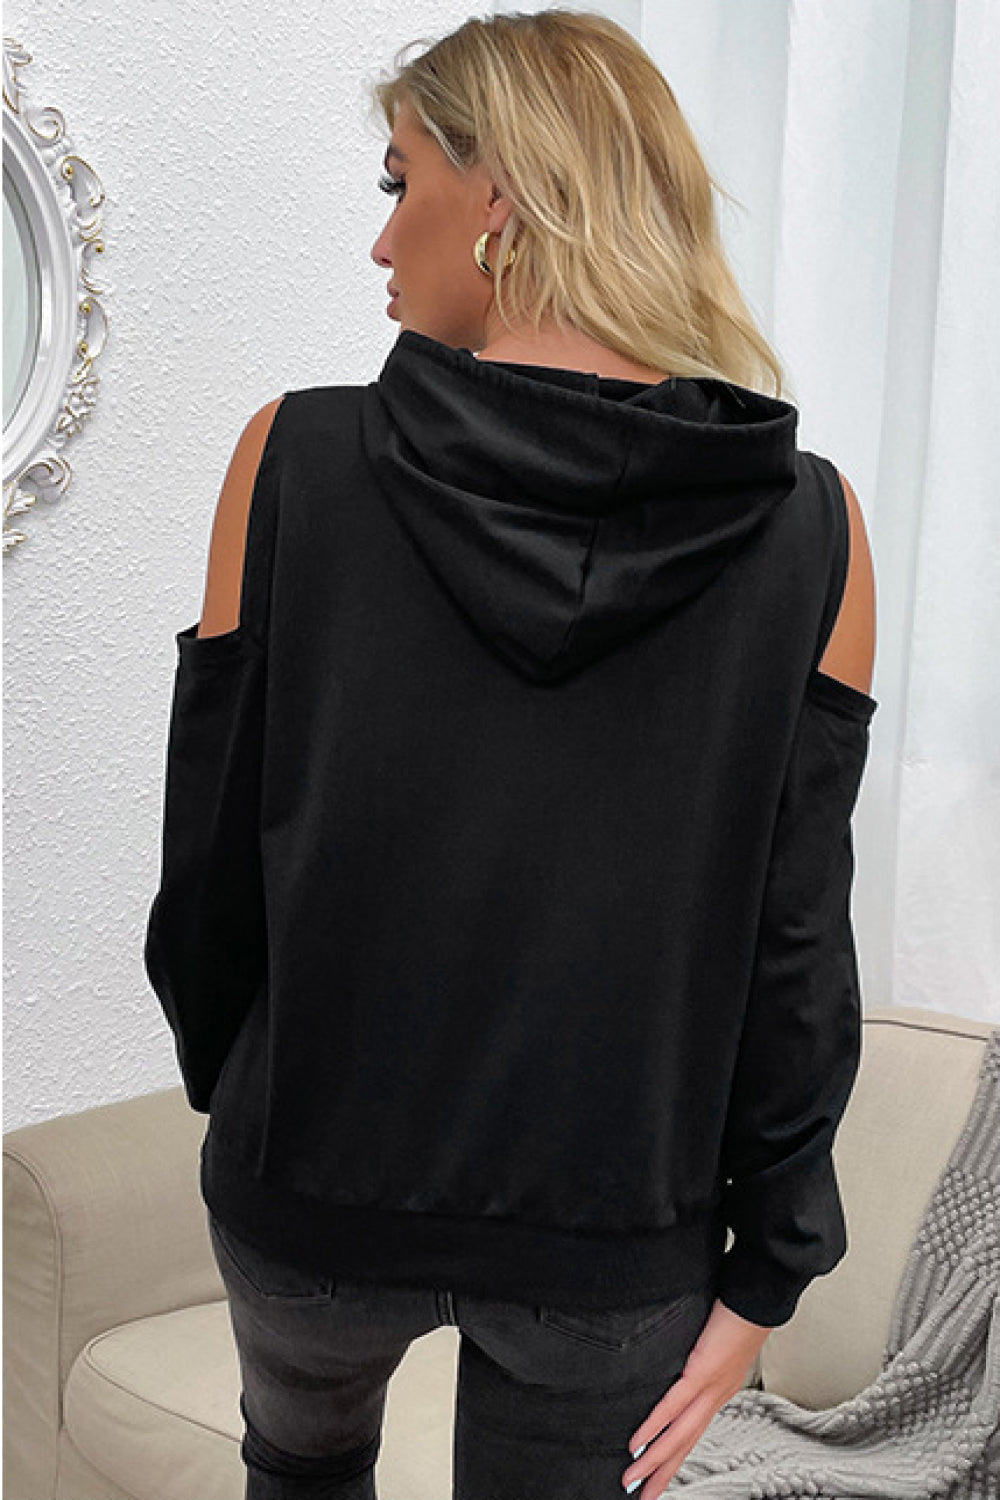 “Evening Errands” is a long sleeve top featuring colder shoulder peek-a-boo cutouts, hoodie with drawstring. Sizes medium through x-large.